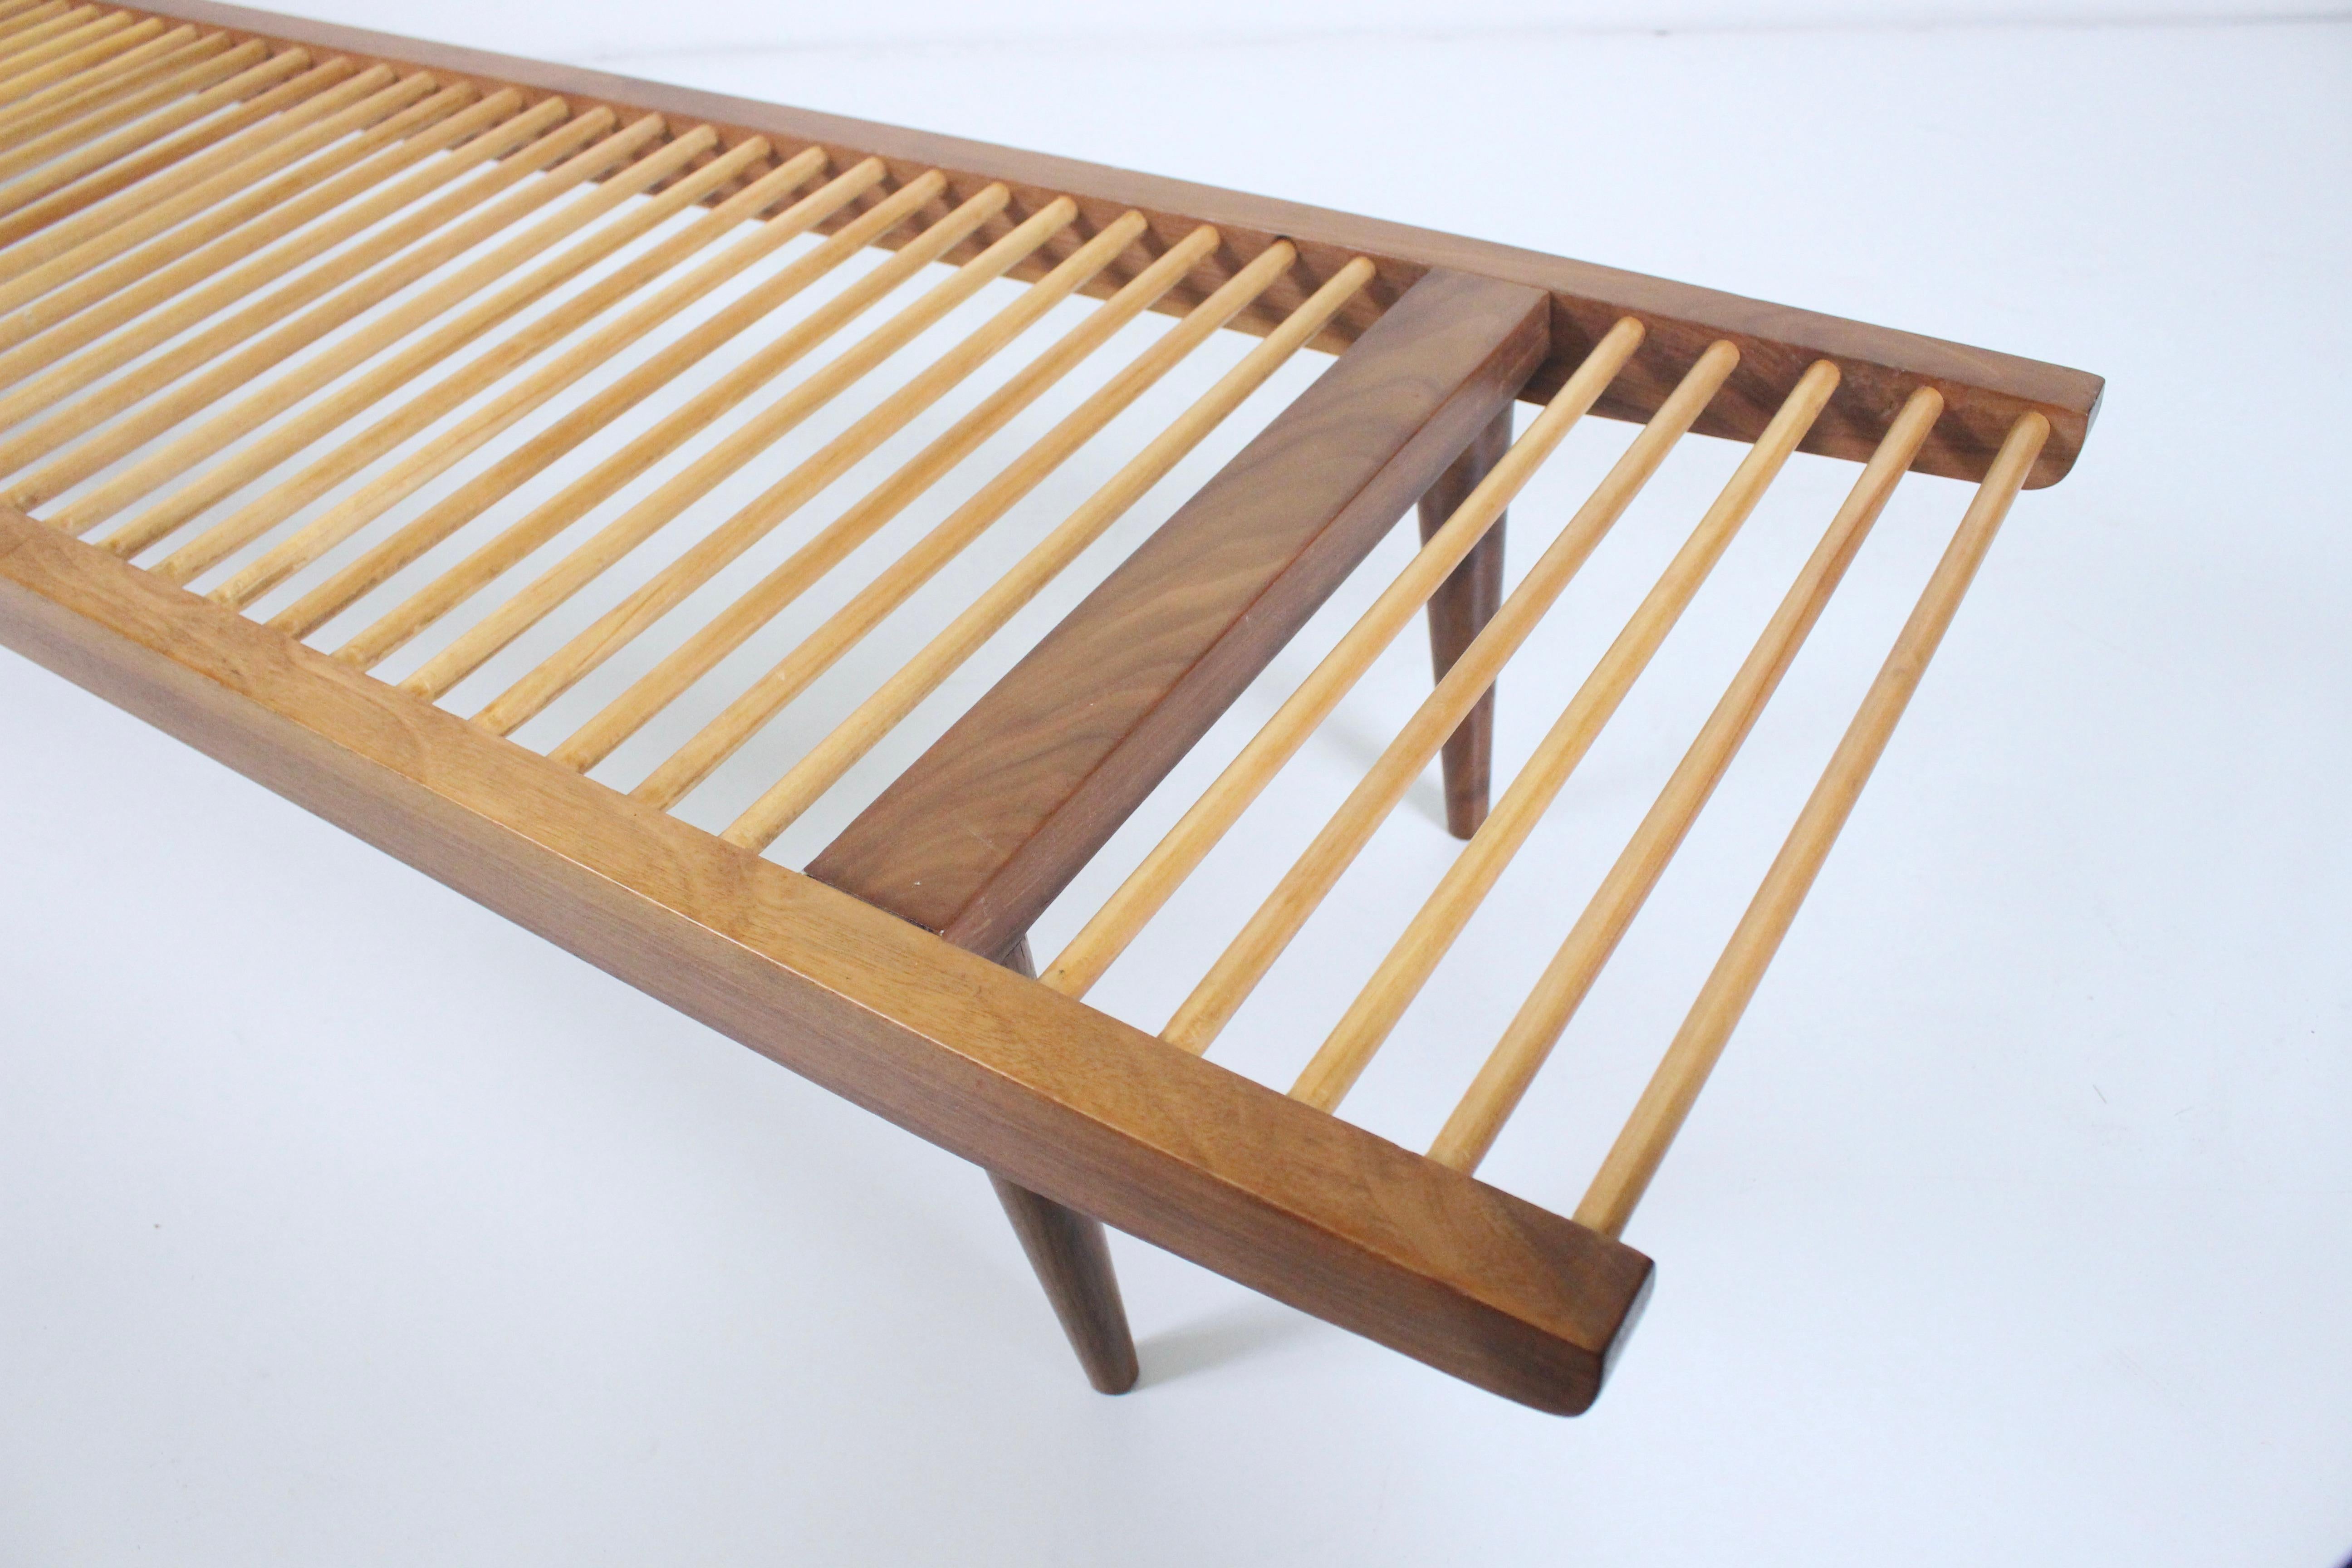 Milo Baughman Walnut and Maple Long Dowel Bench, 1950s In Good Condition For Sale In Bainbridge, NY